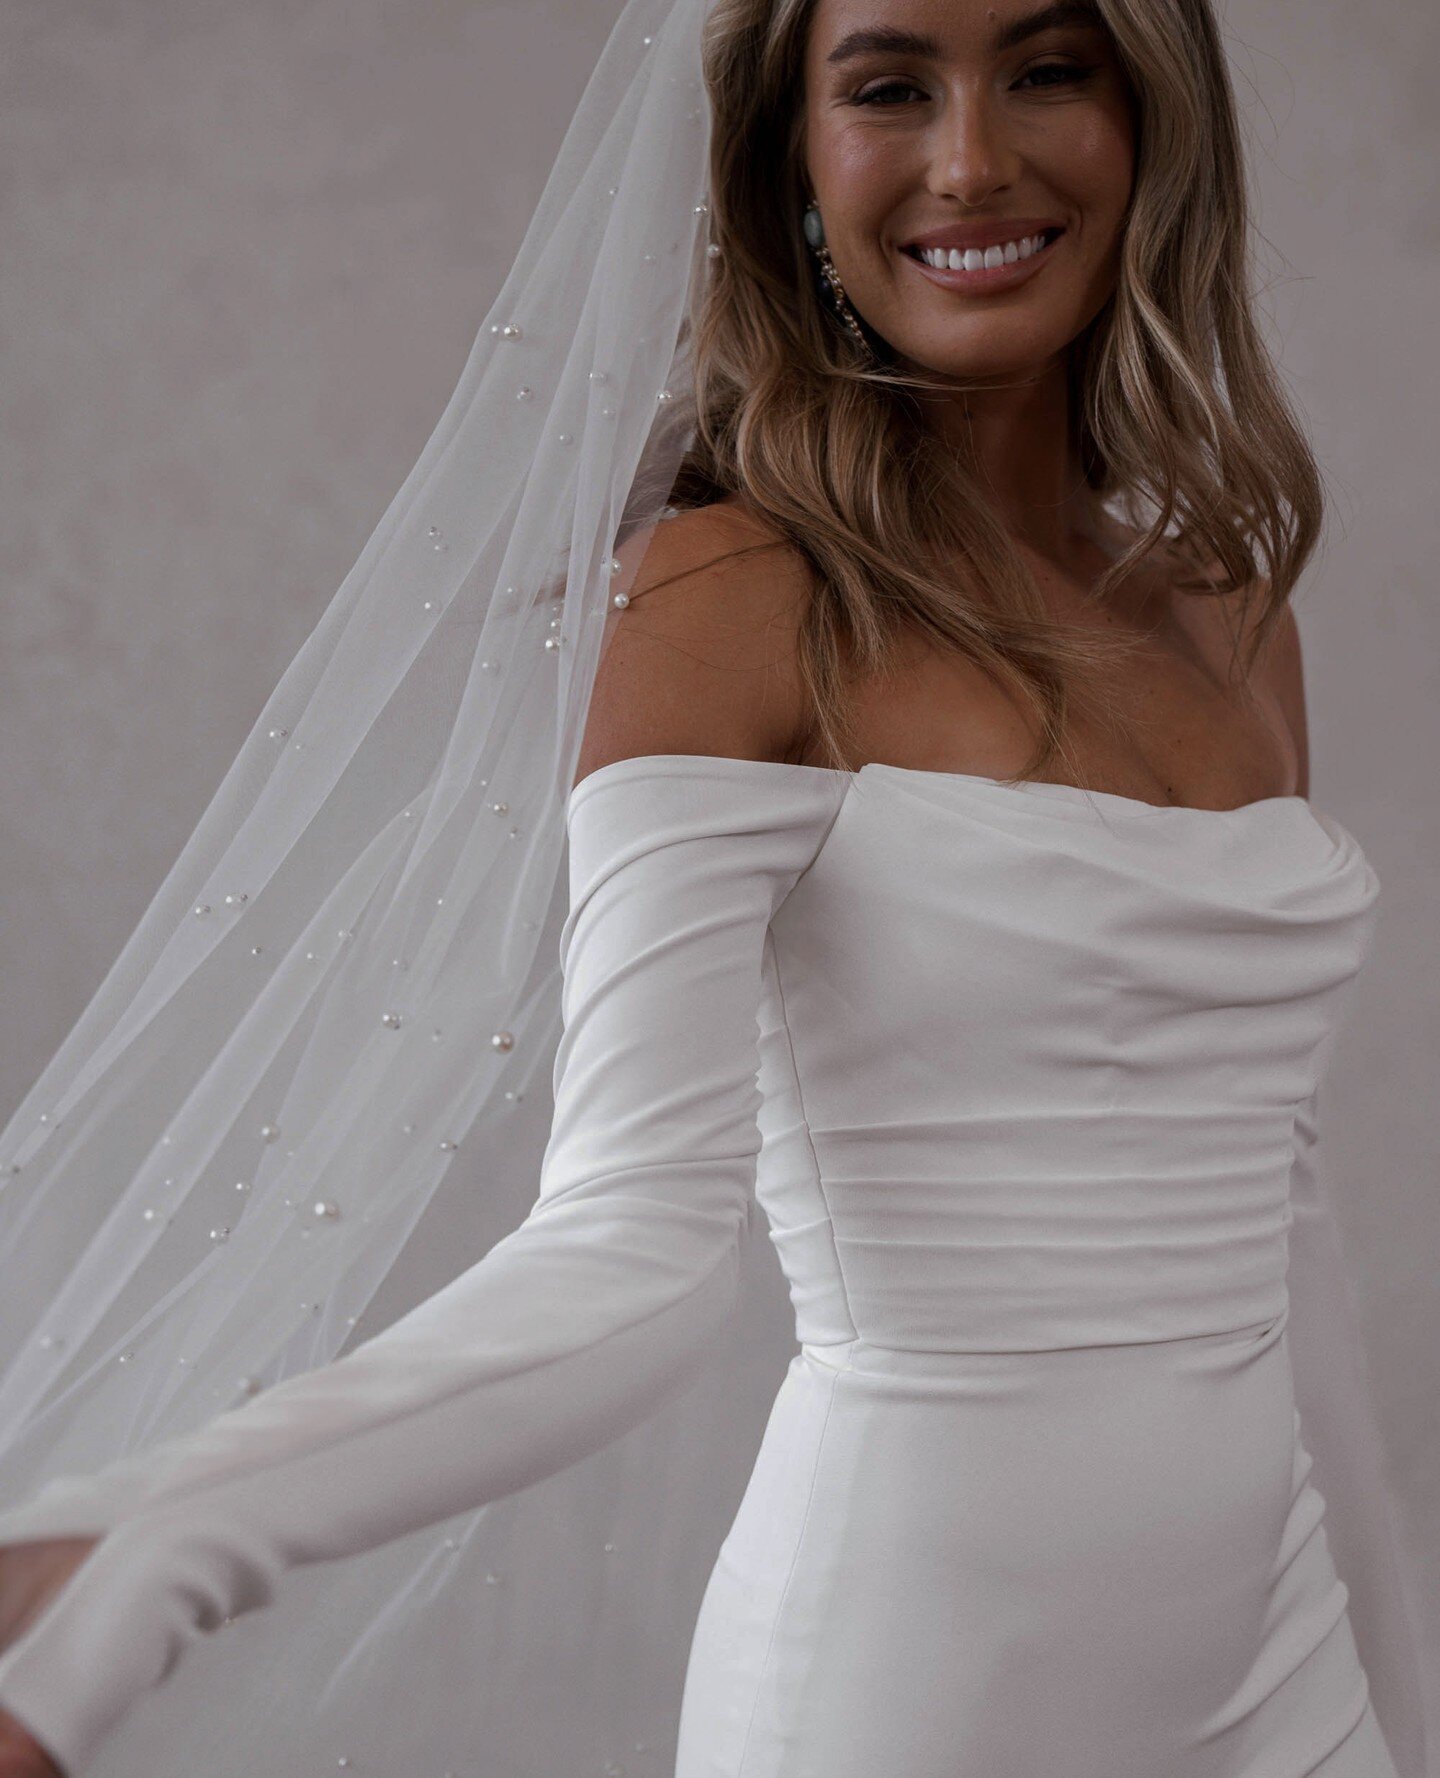 W I N T E R by MWL ✨ Our newest arrival features long off-the-shoulder sleeves, a flattering ruched bodice, and a gorgeous long train - perfect for the modern bride looking for timeless elegance.⁠
⁠
#moondancebridal #MWLWinter #madewithlove #MWLbride